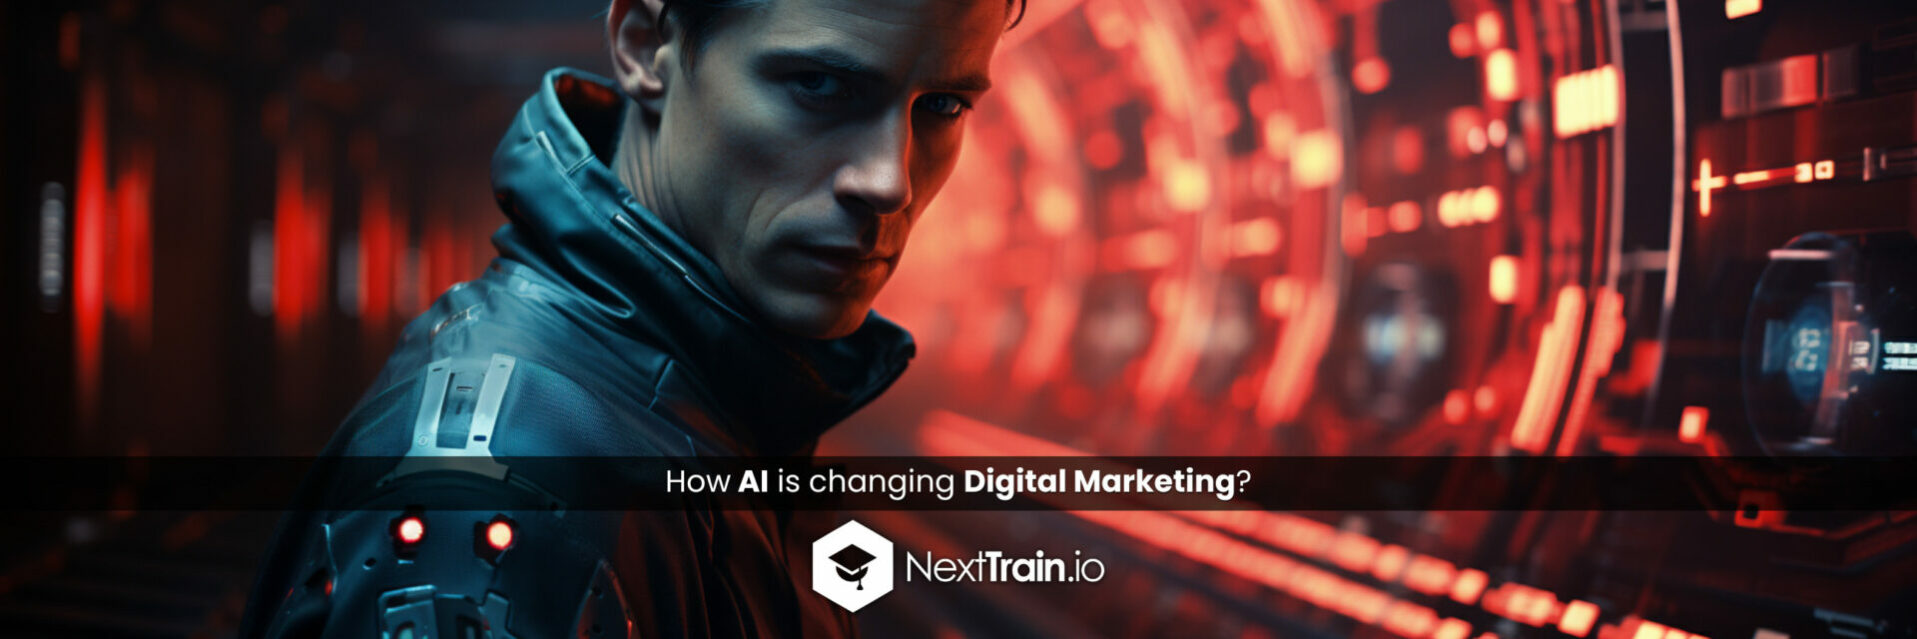 How AI is changing Digital Marketing?